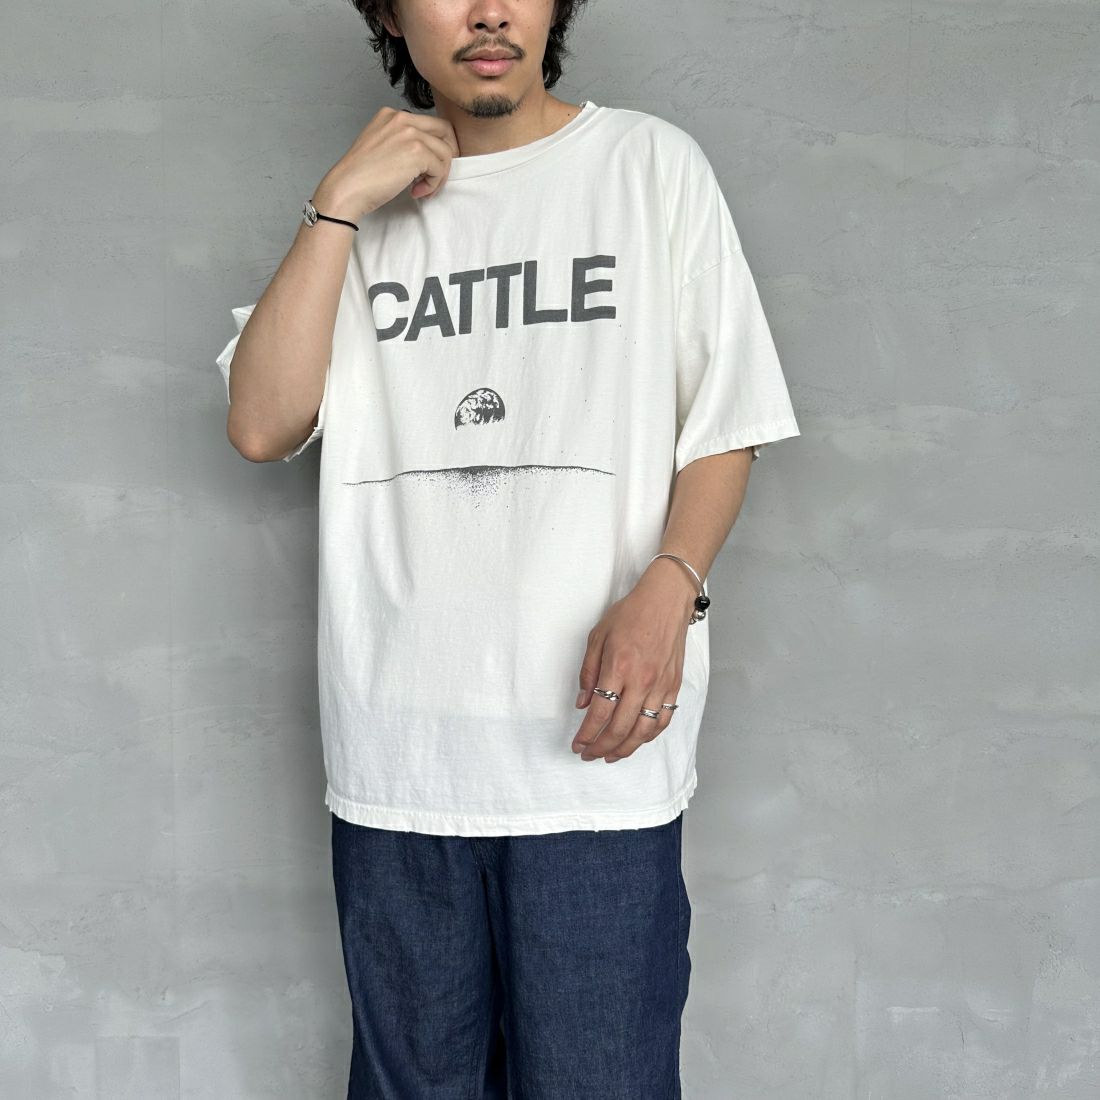 REMI RELIEF [レミレリーフ] 別注 ビッグプリントTシャツ CATTLE [RN26349318-JF]